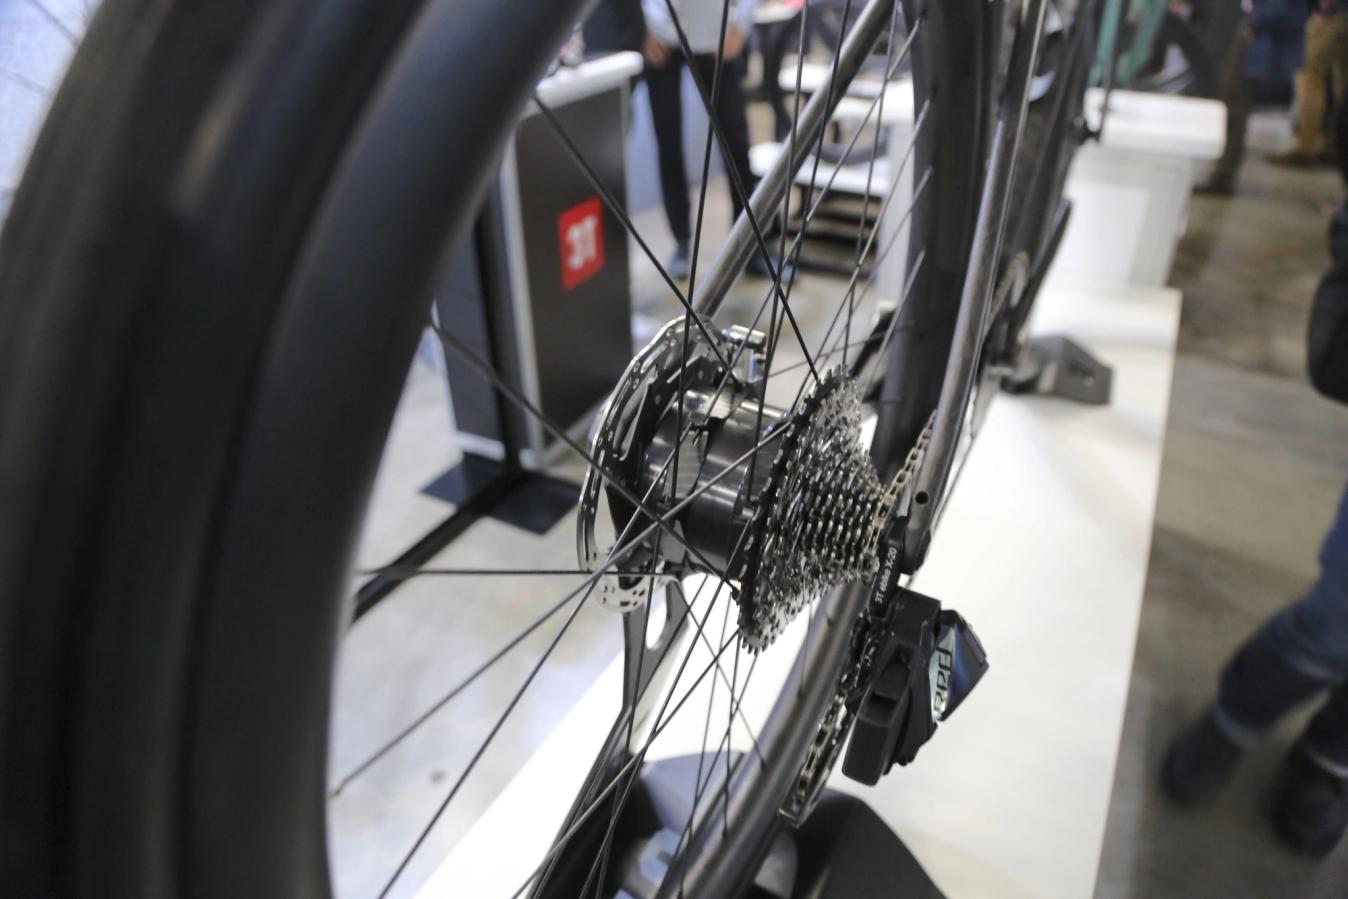 The larger than usual hub is all that gives away the secret to this bike